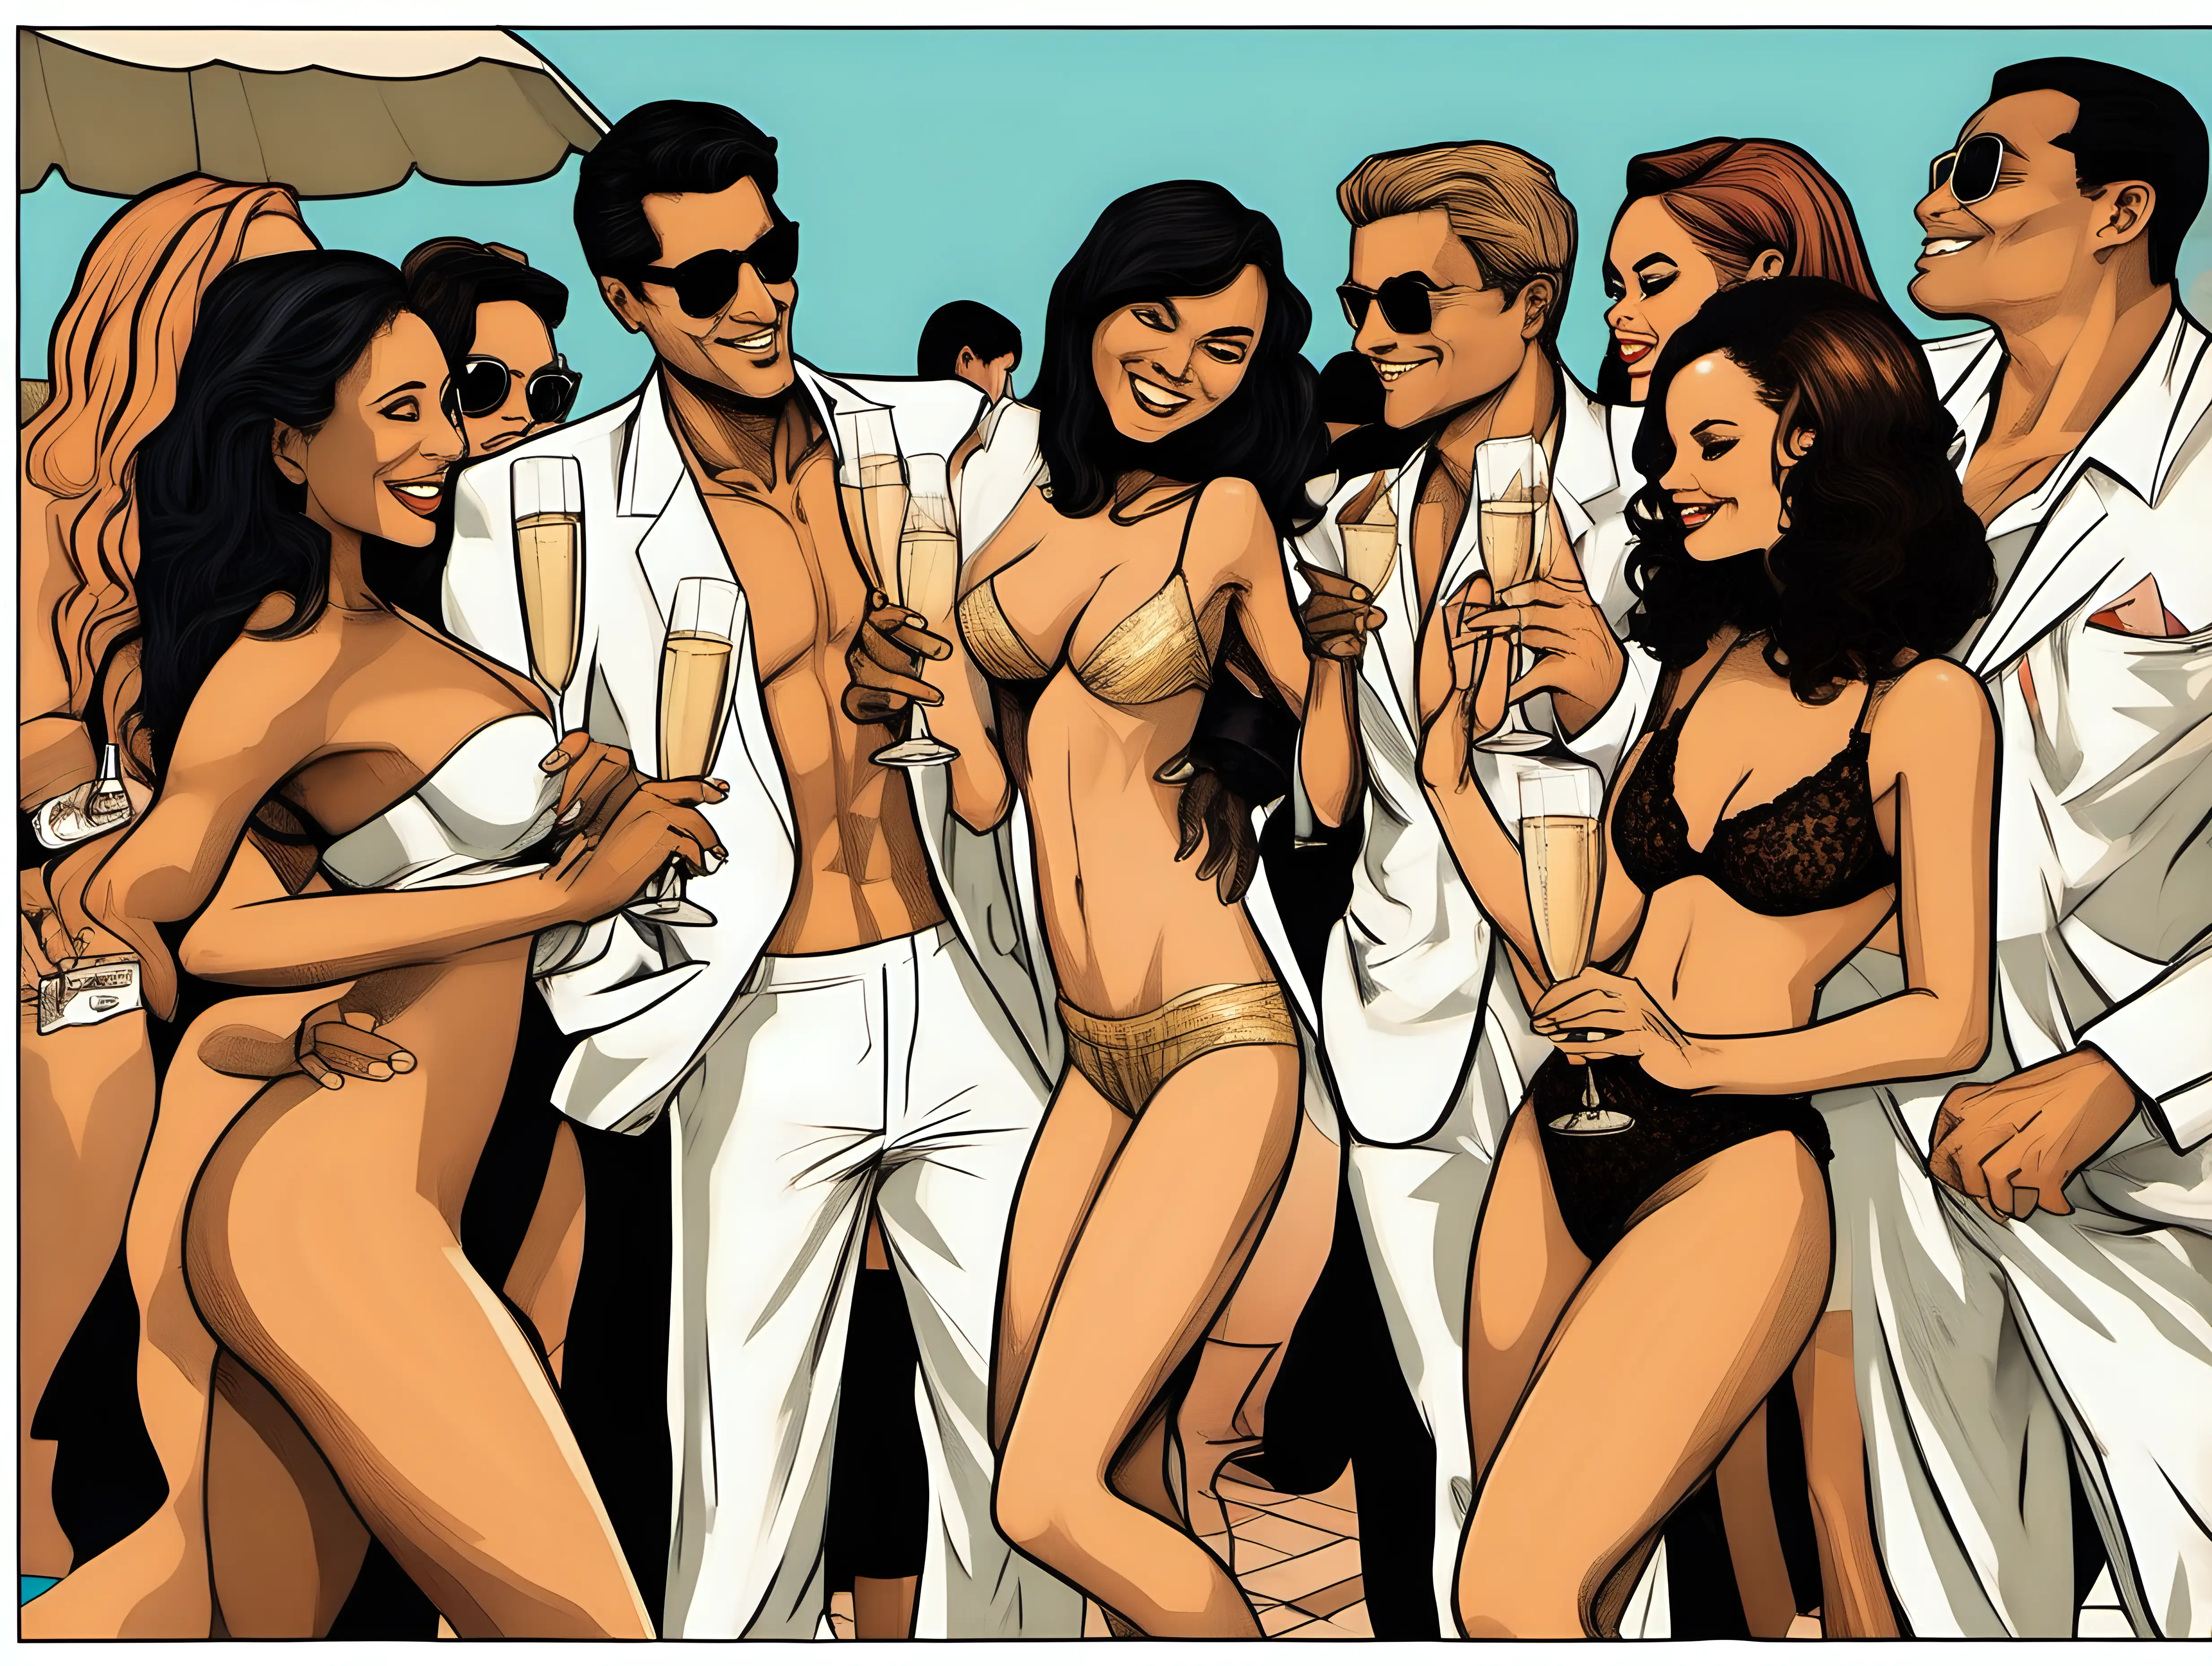 Make an image with a man at the center with 4 ladies around him, 3 are drinking champagne. 
The man in the center is 6ft tall, alpha and dominant, wearing linen pants and a linen shirt . Man is light brown skinned, toned body and has medium length black hair , and all the girls are dressed in dresses and lingerie. He has a cigar in one hand and his other hand is on a women's butt. In the background is a pool party, with 100 more people partying and dancing . Some are in the pool, popping champagne in the back

